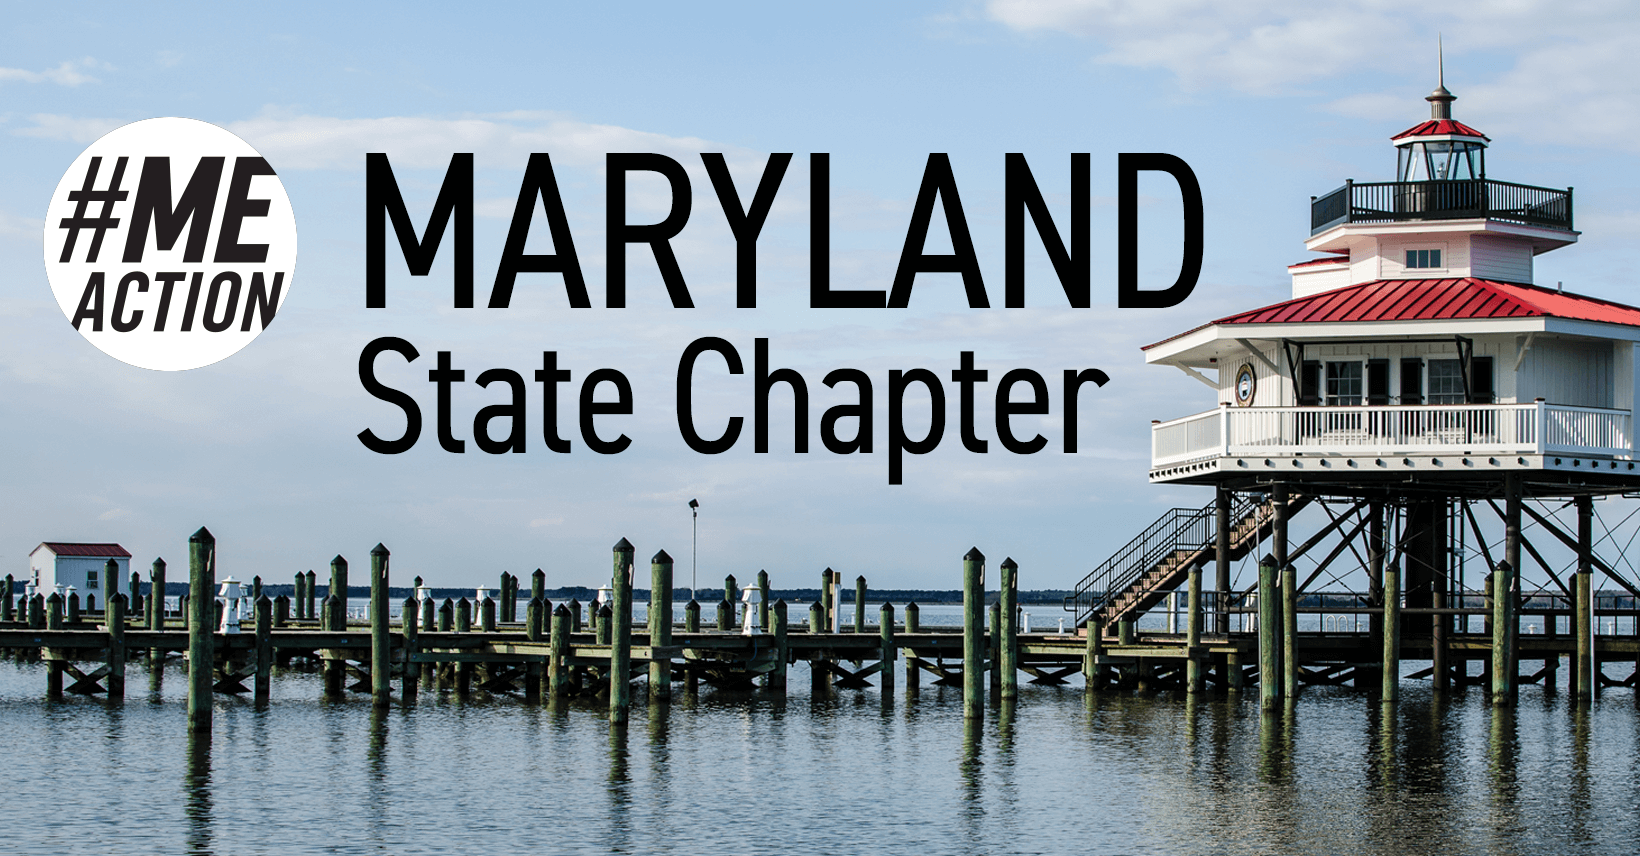 An image of a Marland lighthouse and pier with the #MEACTION white circle logo and black text. Maryland State Chapter is written in black text.